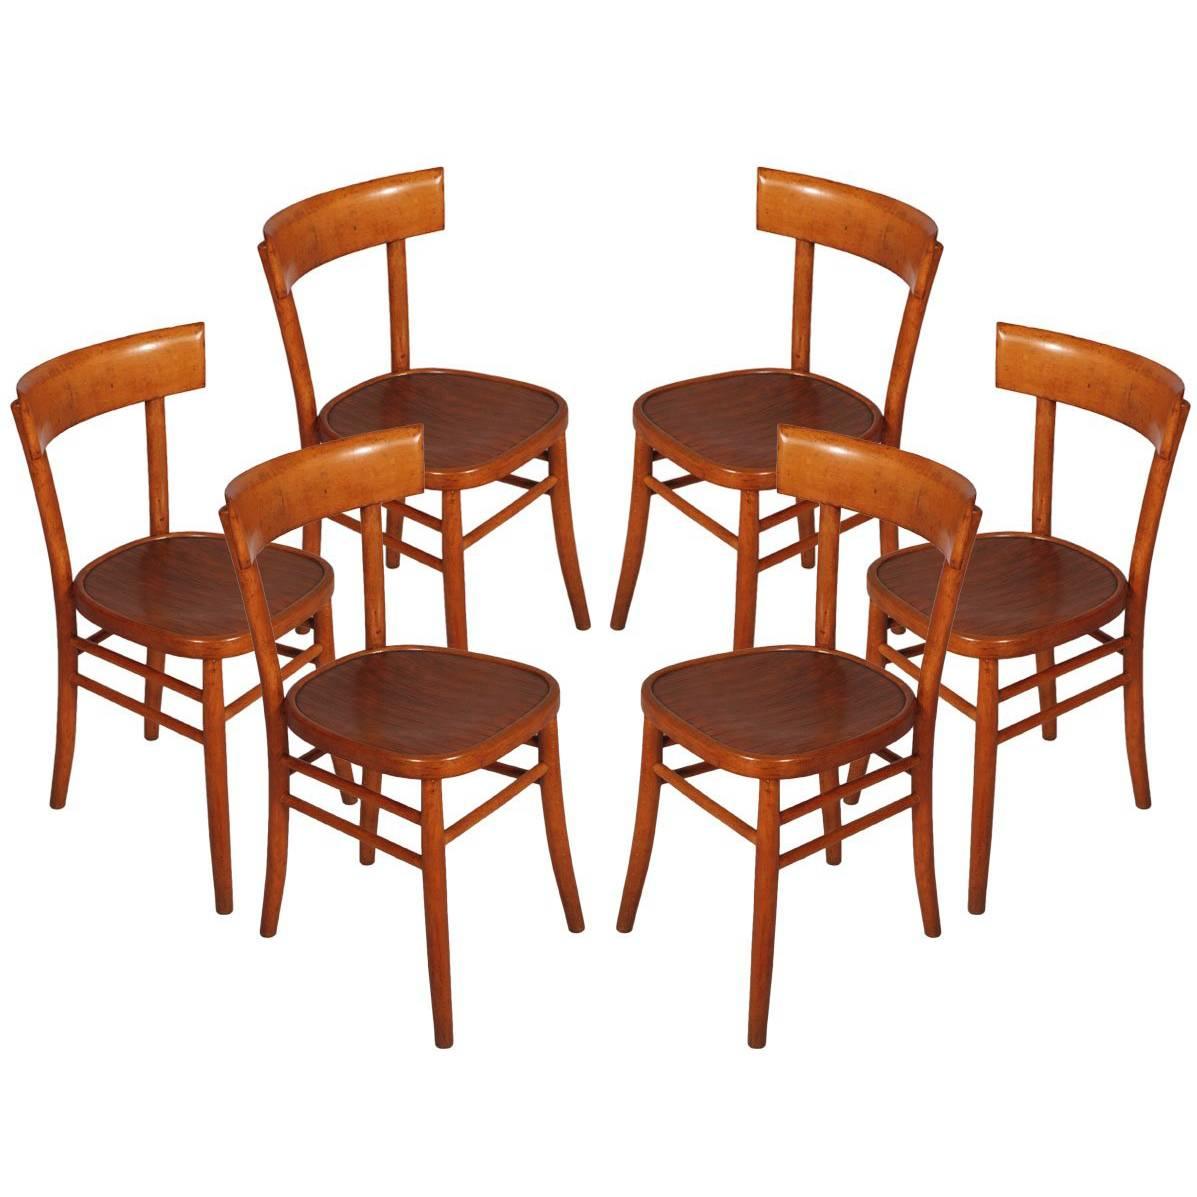 Italian Mid-Century Modern Six Chairs in wood of beech,  by I.S.A. Bergamo For Sale